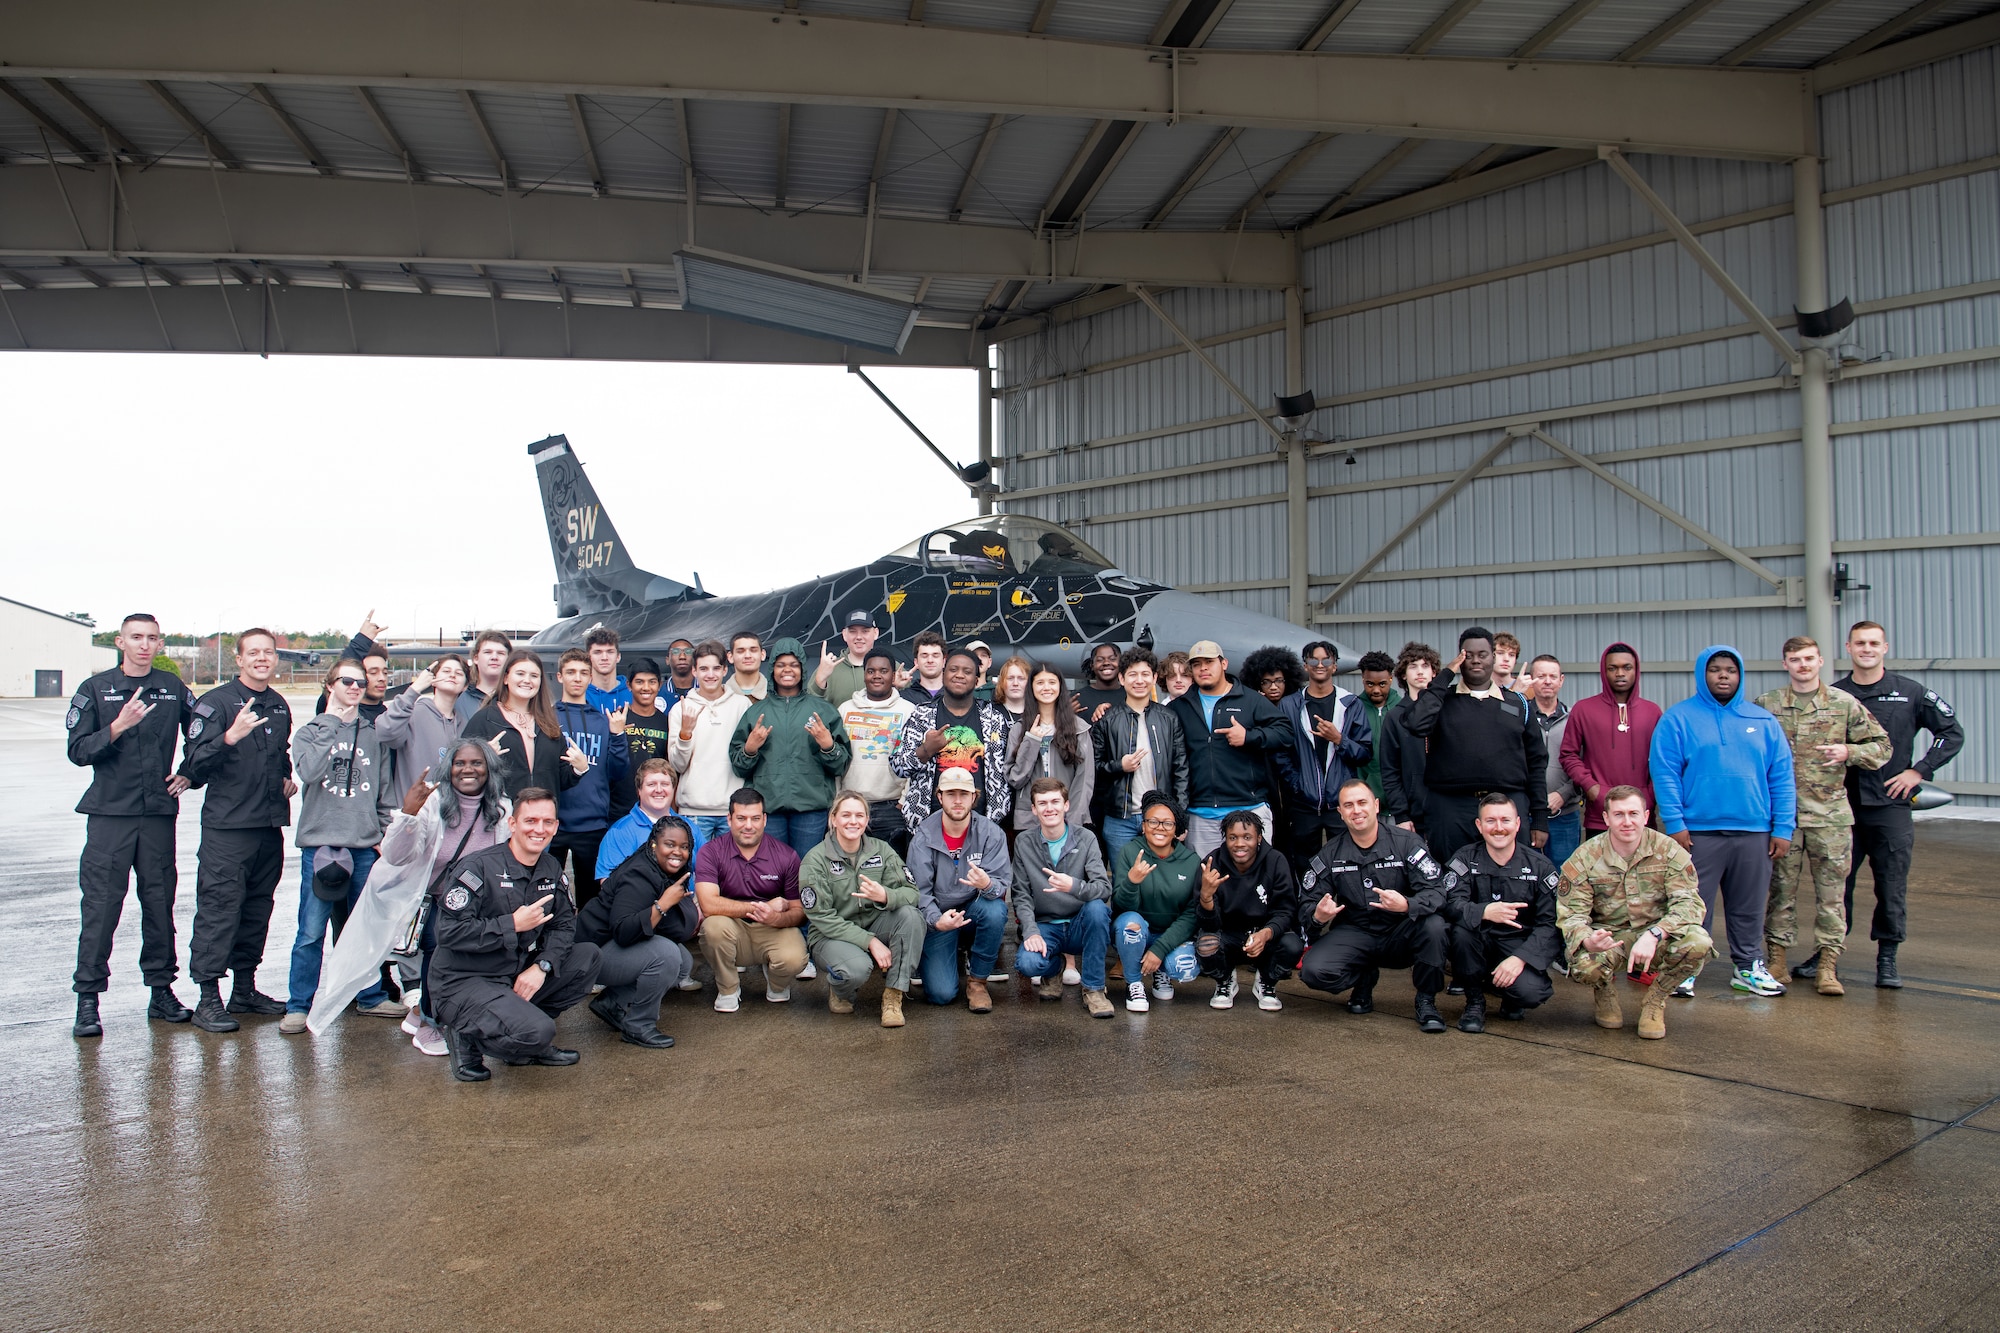 Members of the U.S. Air Force Air Combat Command F-16 Viper Demonstration Team and Florence 1 School District’s Advantage Academy students pose for a photo at Shaw Air Force Base, S.C., Nov. 30, 2022. Units from Ninth Air Force (Air Forces Central), 15th Air Force and the 20th Fighter Wing worked together to host an engagement for 35 local high school students as part of Project Quesada. The new Air Combat Command-led program is designed to attract and recruit talented students seeking careers in aviation, science, technology, engineering and math in an effort to develop future aviators and leaders. (U.S. Air Force photo by Staff Sgt. Kelsey Owen)